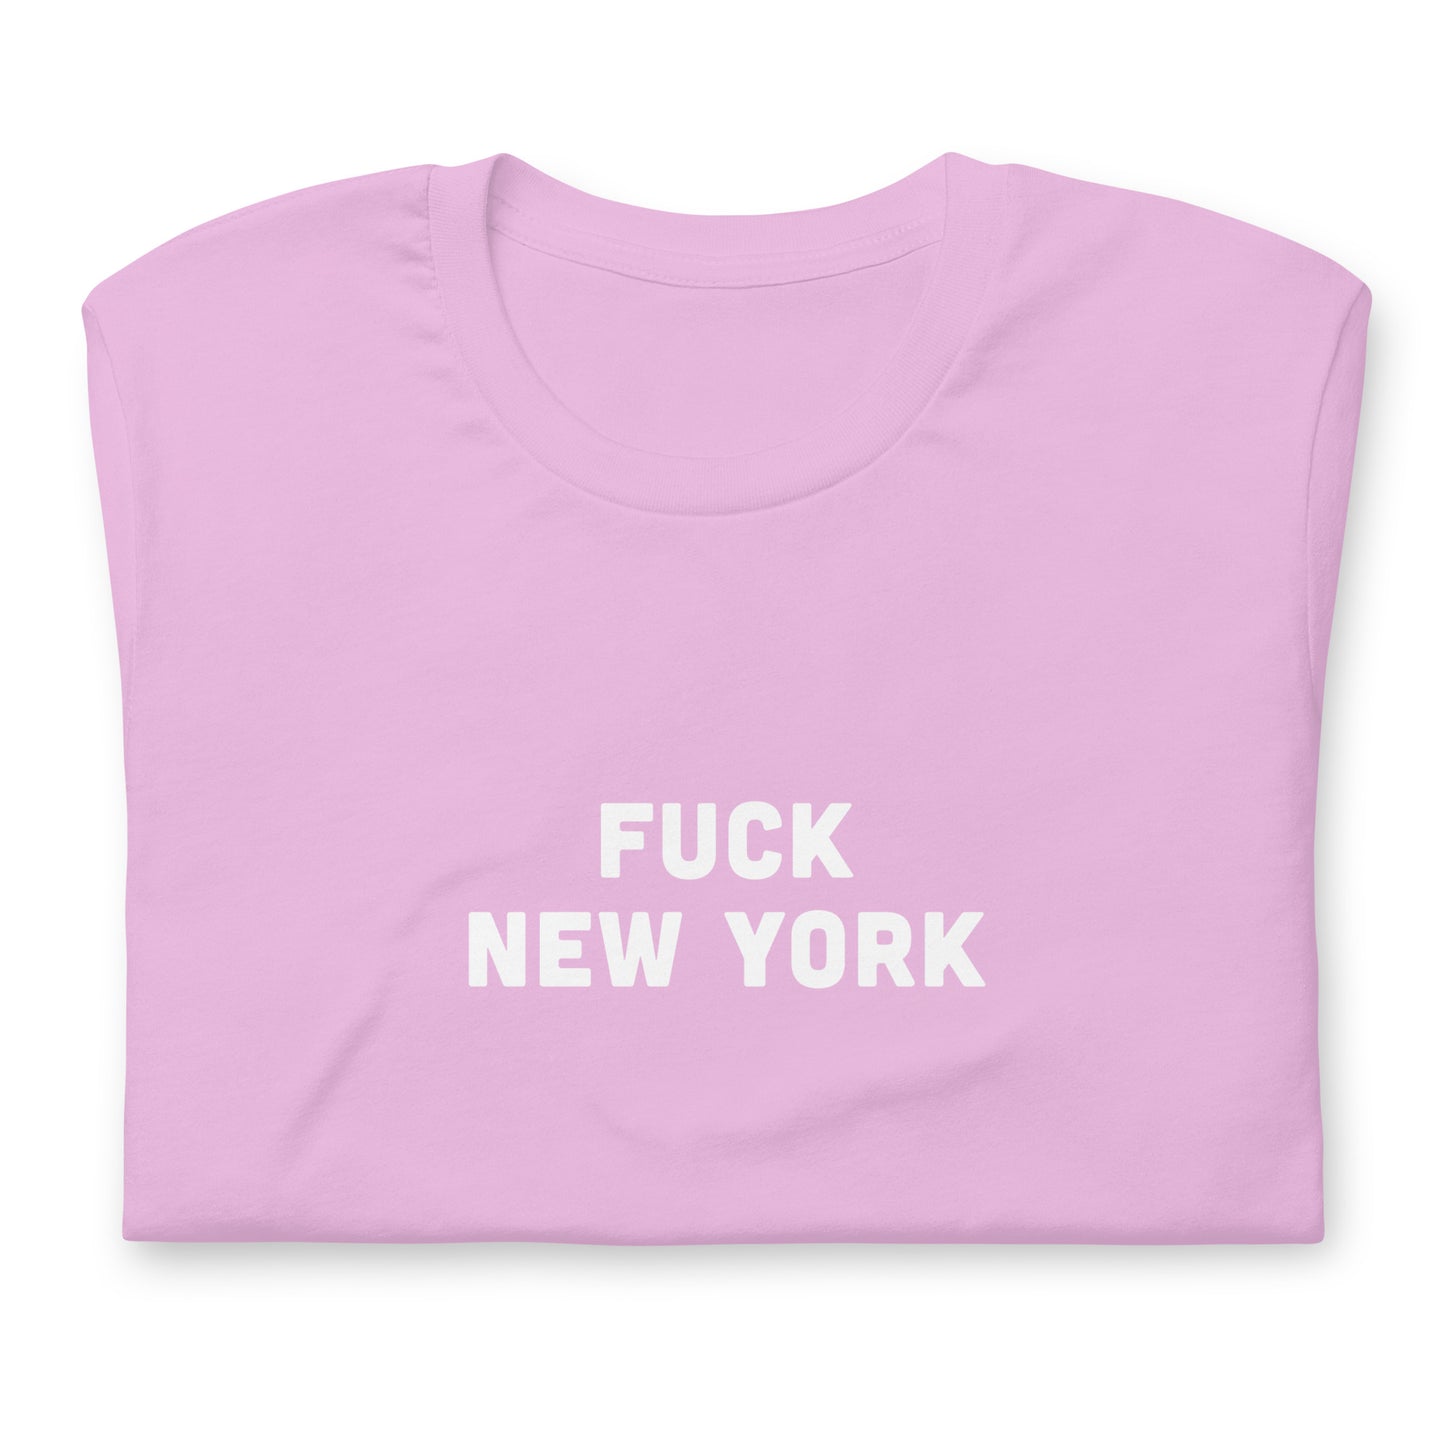 Fuck New York T-Shirt Size 2XL Color Forest